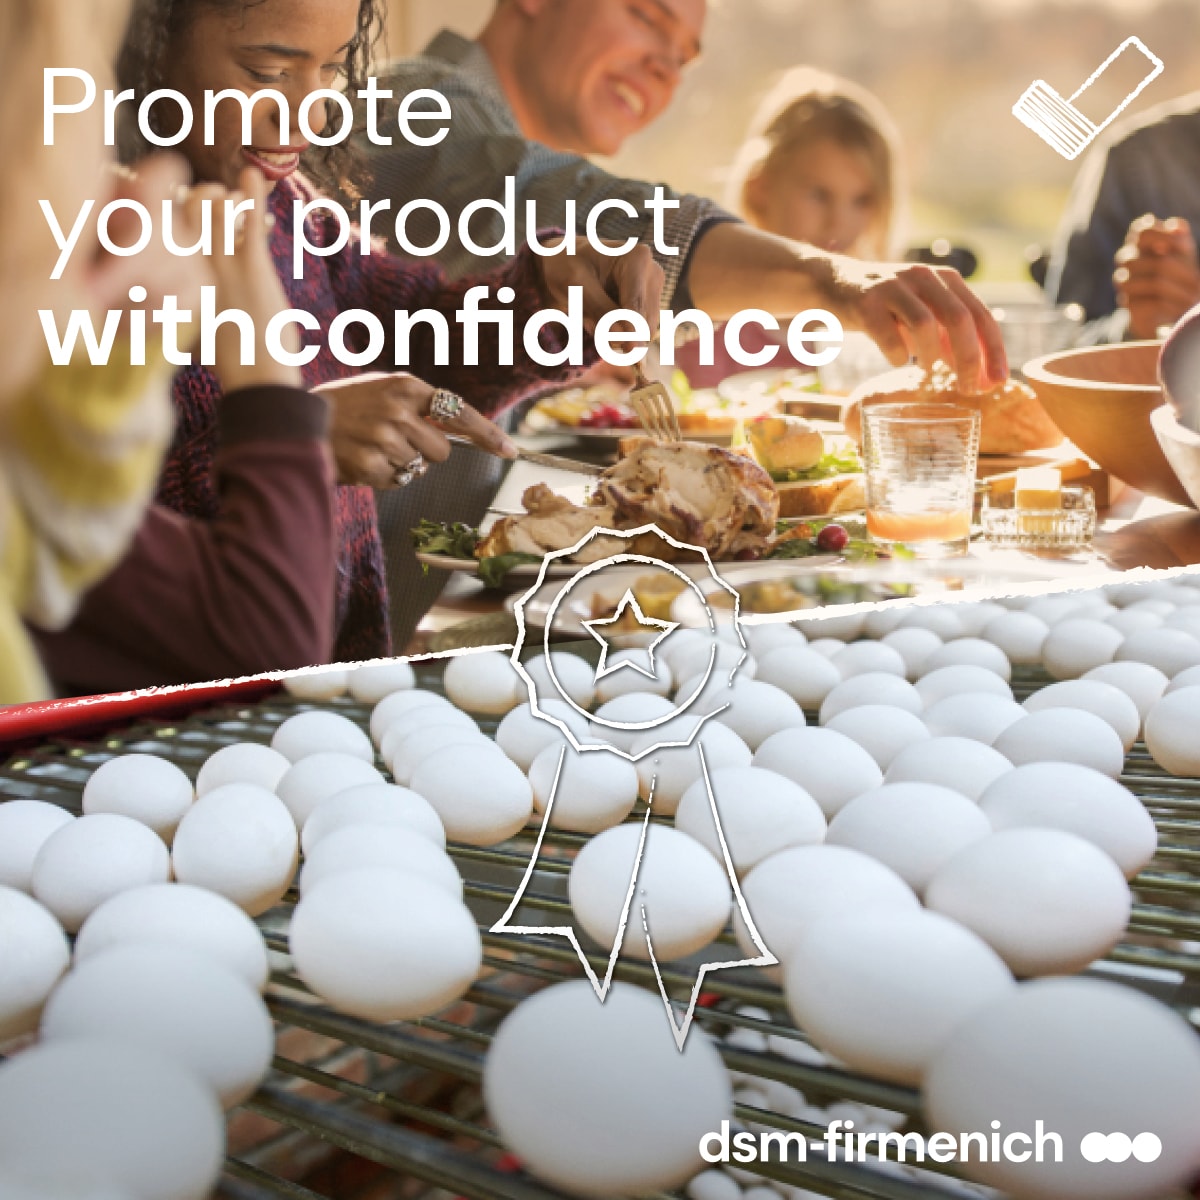 Promote your product with confidence